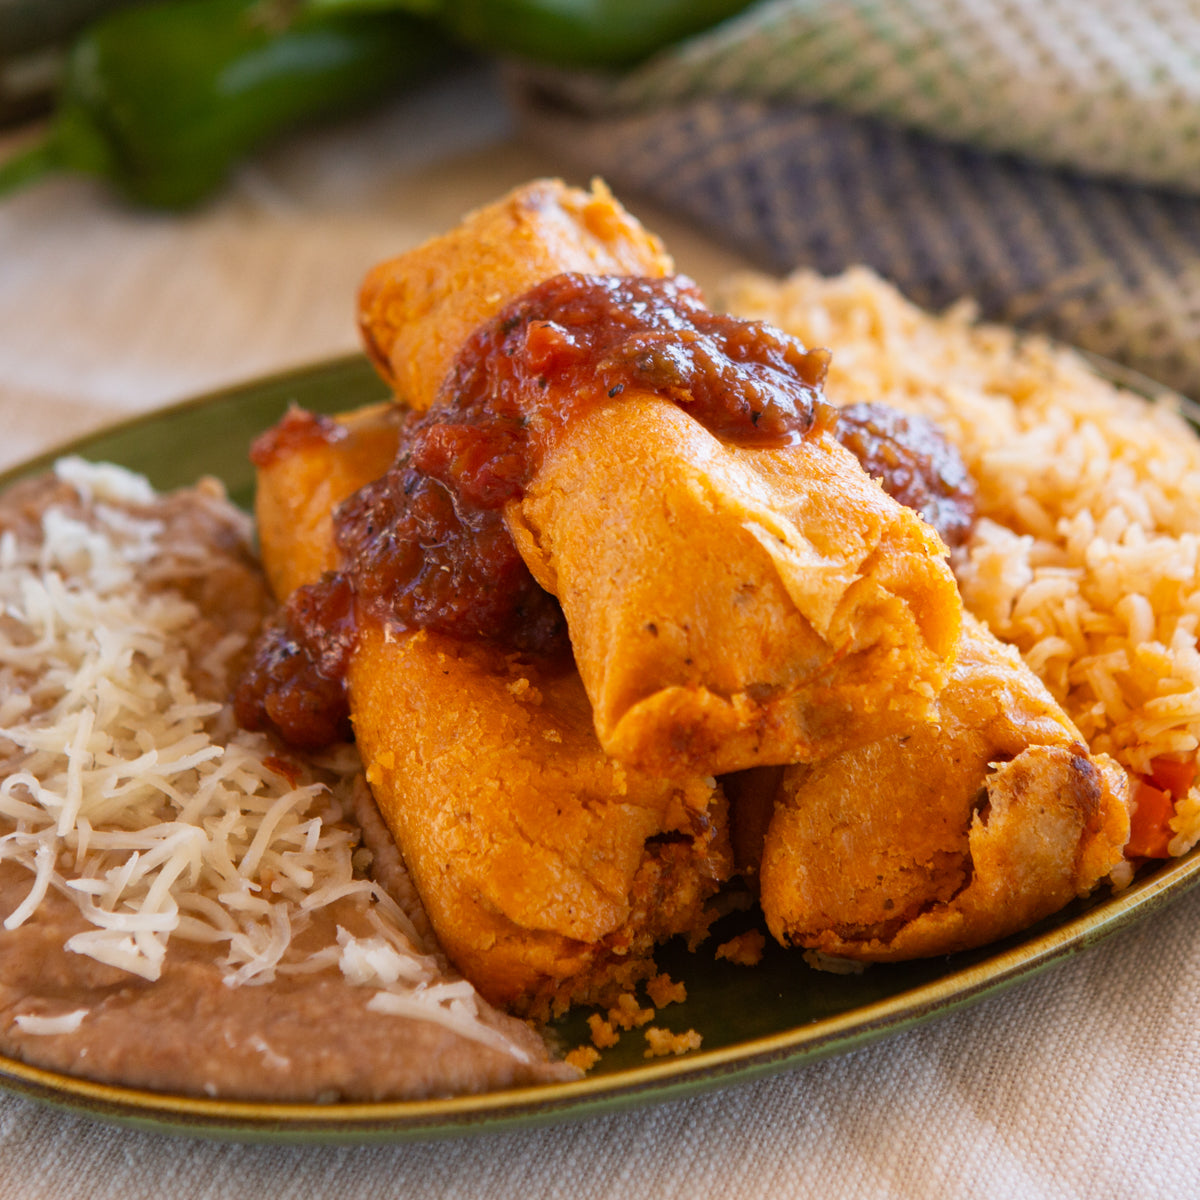 A plate of Mexican food featuring golden-browned Hatch Red Chile Pork Tamales topped with Hatch Red Chile salsa, accompanied by a side of rice and refried beans, garnished with